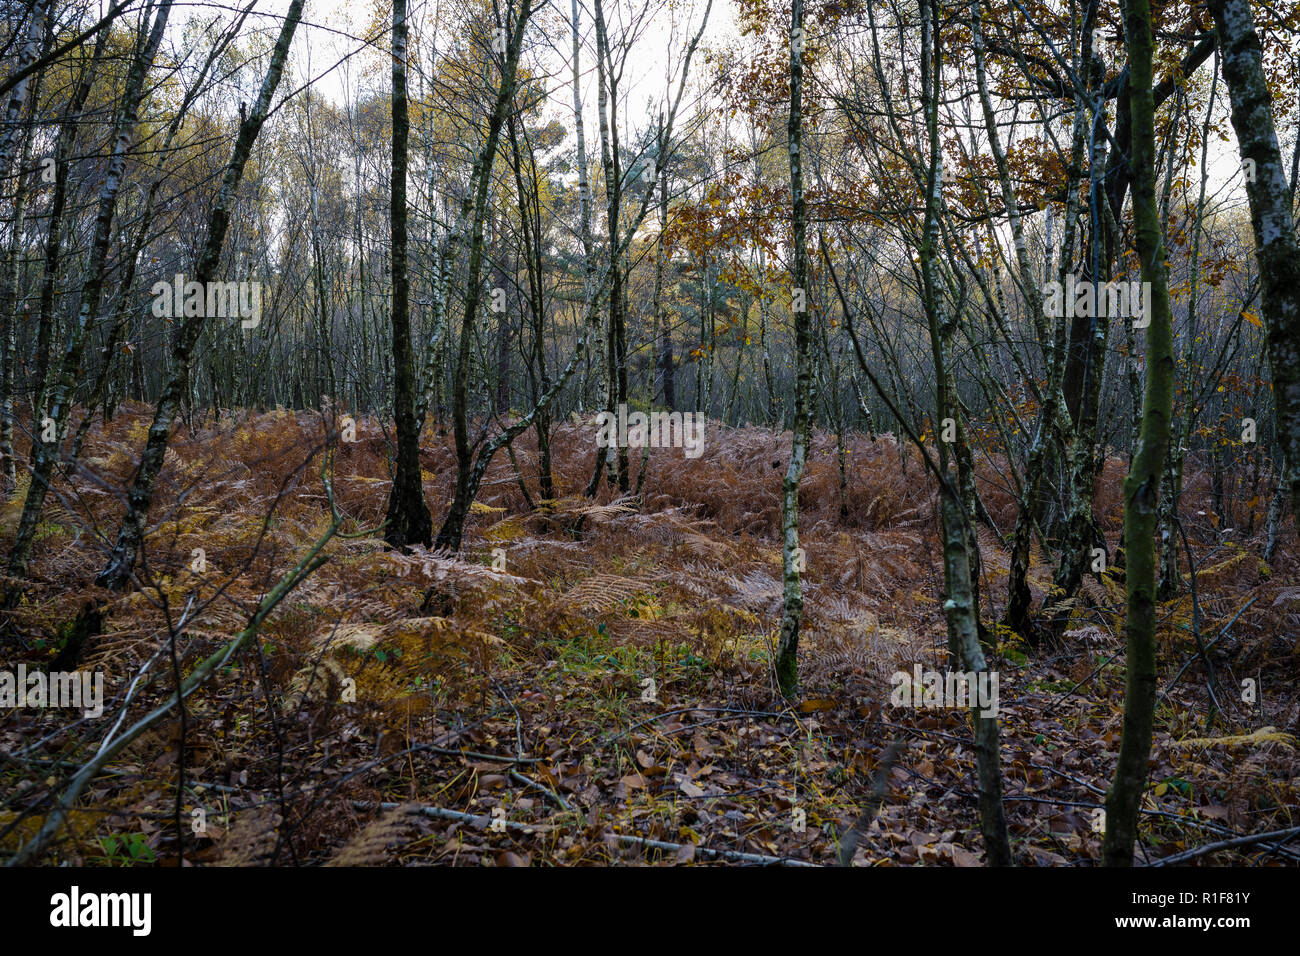 Wood in Autumn with leaves changing colour Stock Photo